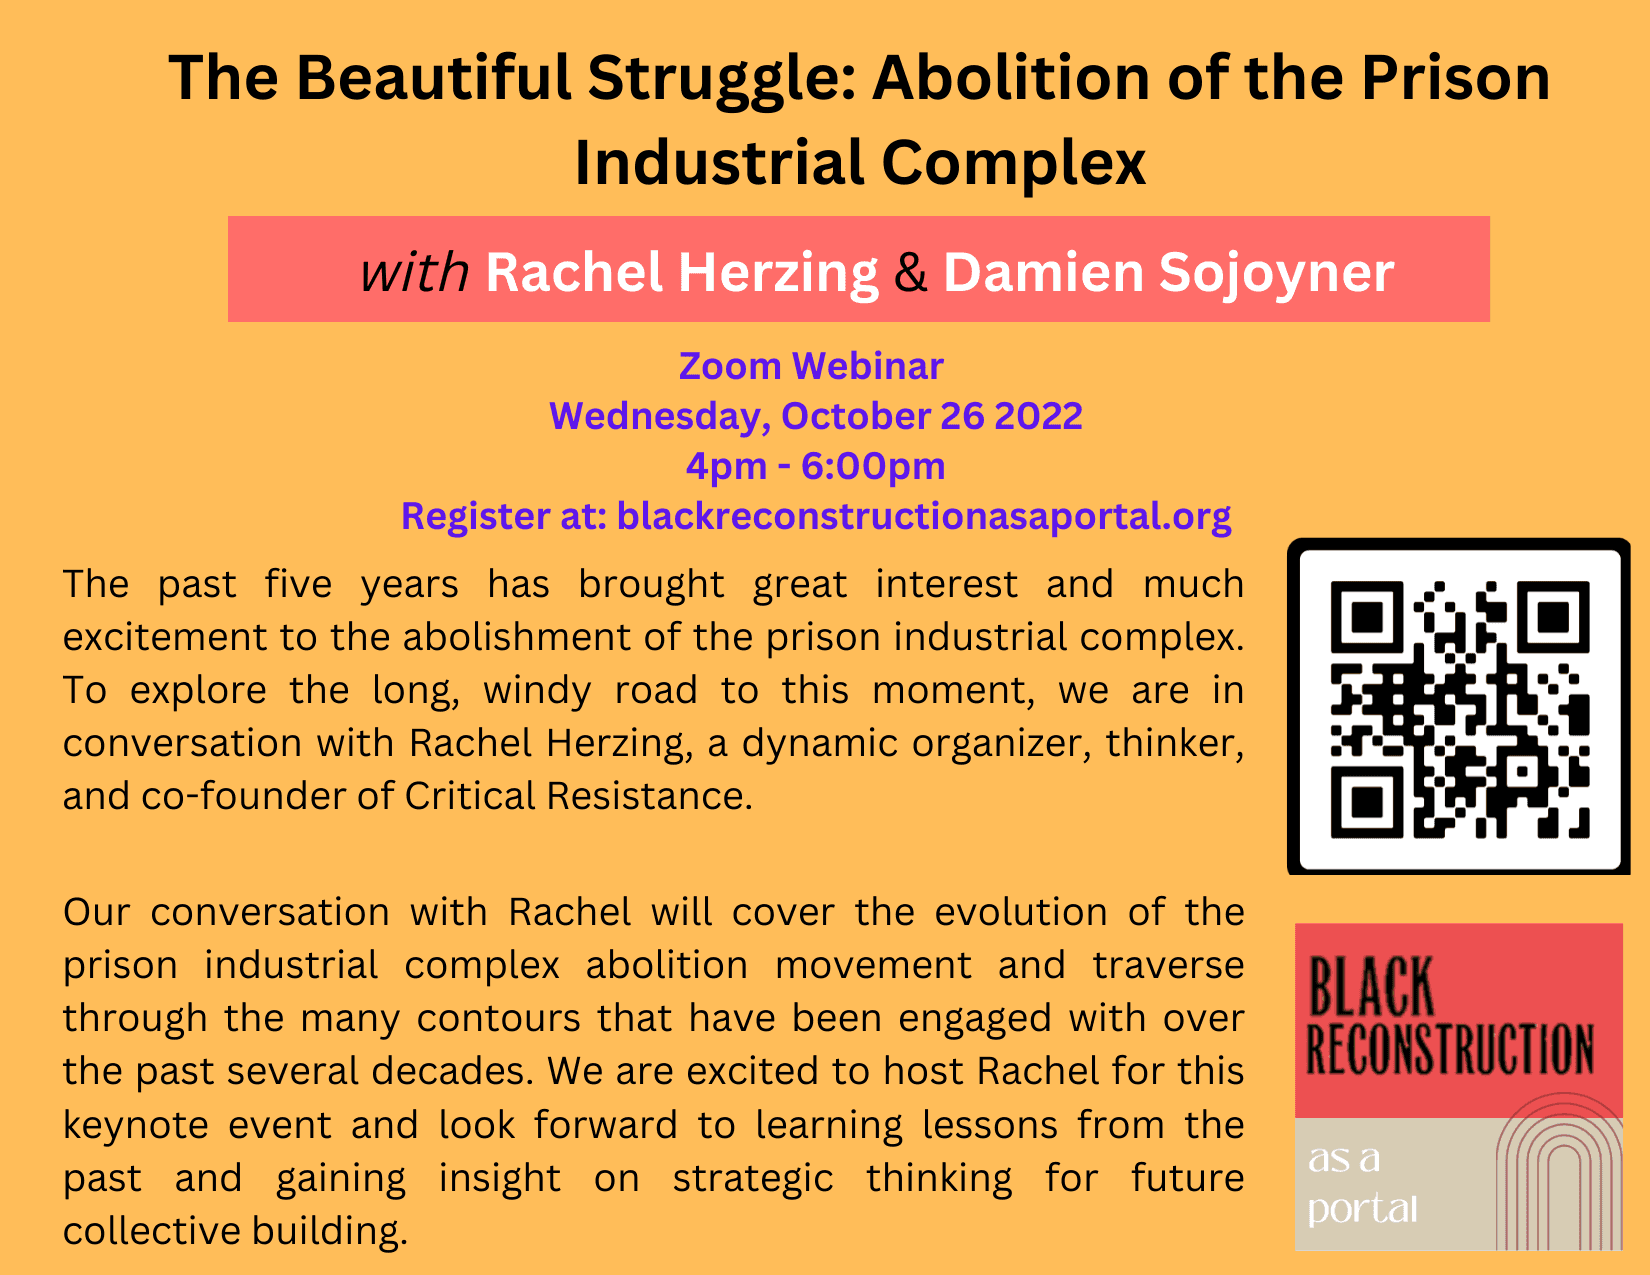 The Beautiful Struggle: Abolition of the Prison Industrial Complex